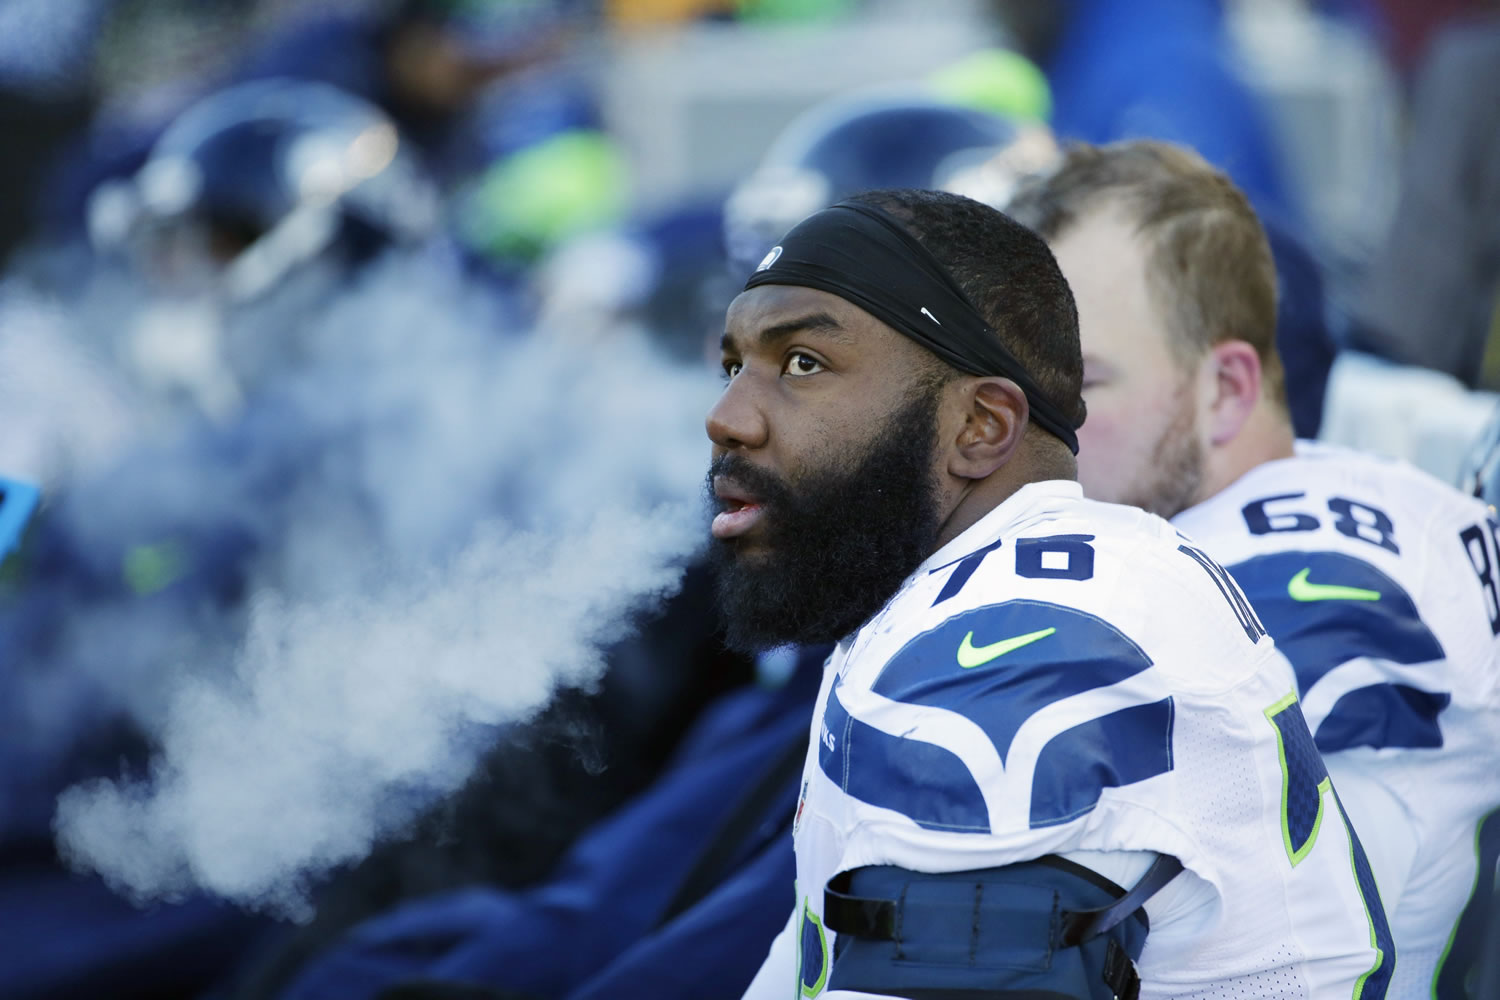 FILE - In this Sunday, Jan. 10, 2016 file photo, Seattle Seahawks tackle Russell Okung (76) sits on the bench during the second half of an NFL wild-card football game against the Minnesota Vikings in Minneapolis. John Elway bolstered both his offensive line and his already strong reputation as one of the NFL?s best general managers Thursday, March 17, 2016 by luring former Seattle Seahawks left tackle Russell Okung to the Denver Broncos.(AP Photo/Nam Y.